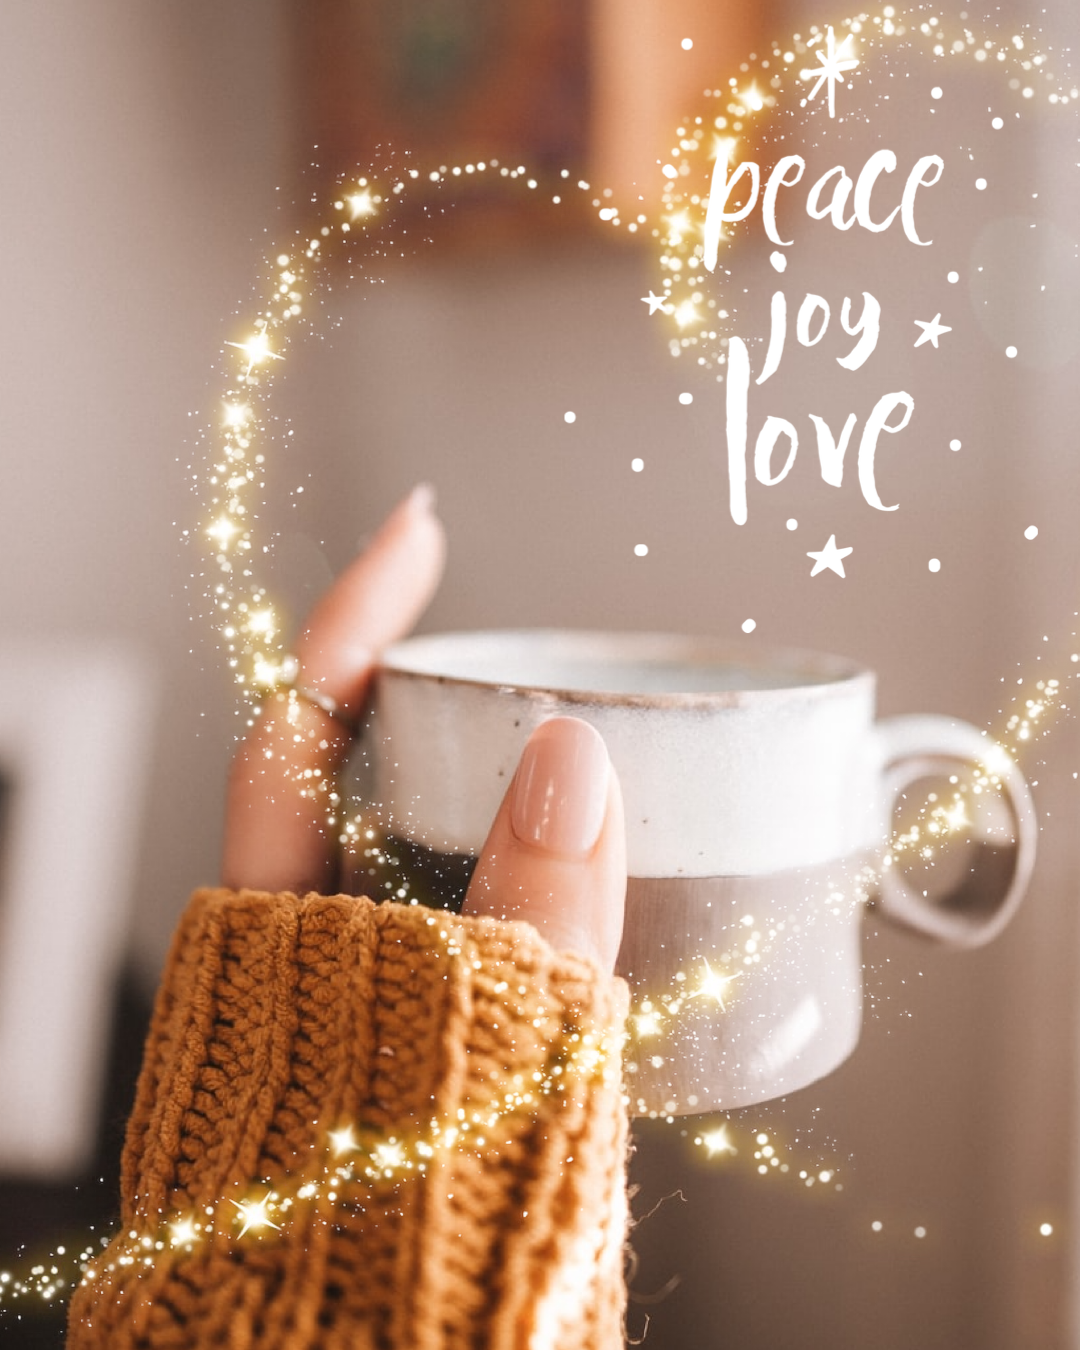 A Woman Holding A Cup Of Coffee With The Words Peace Joy Love Merry Christmas Template